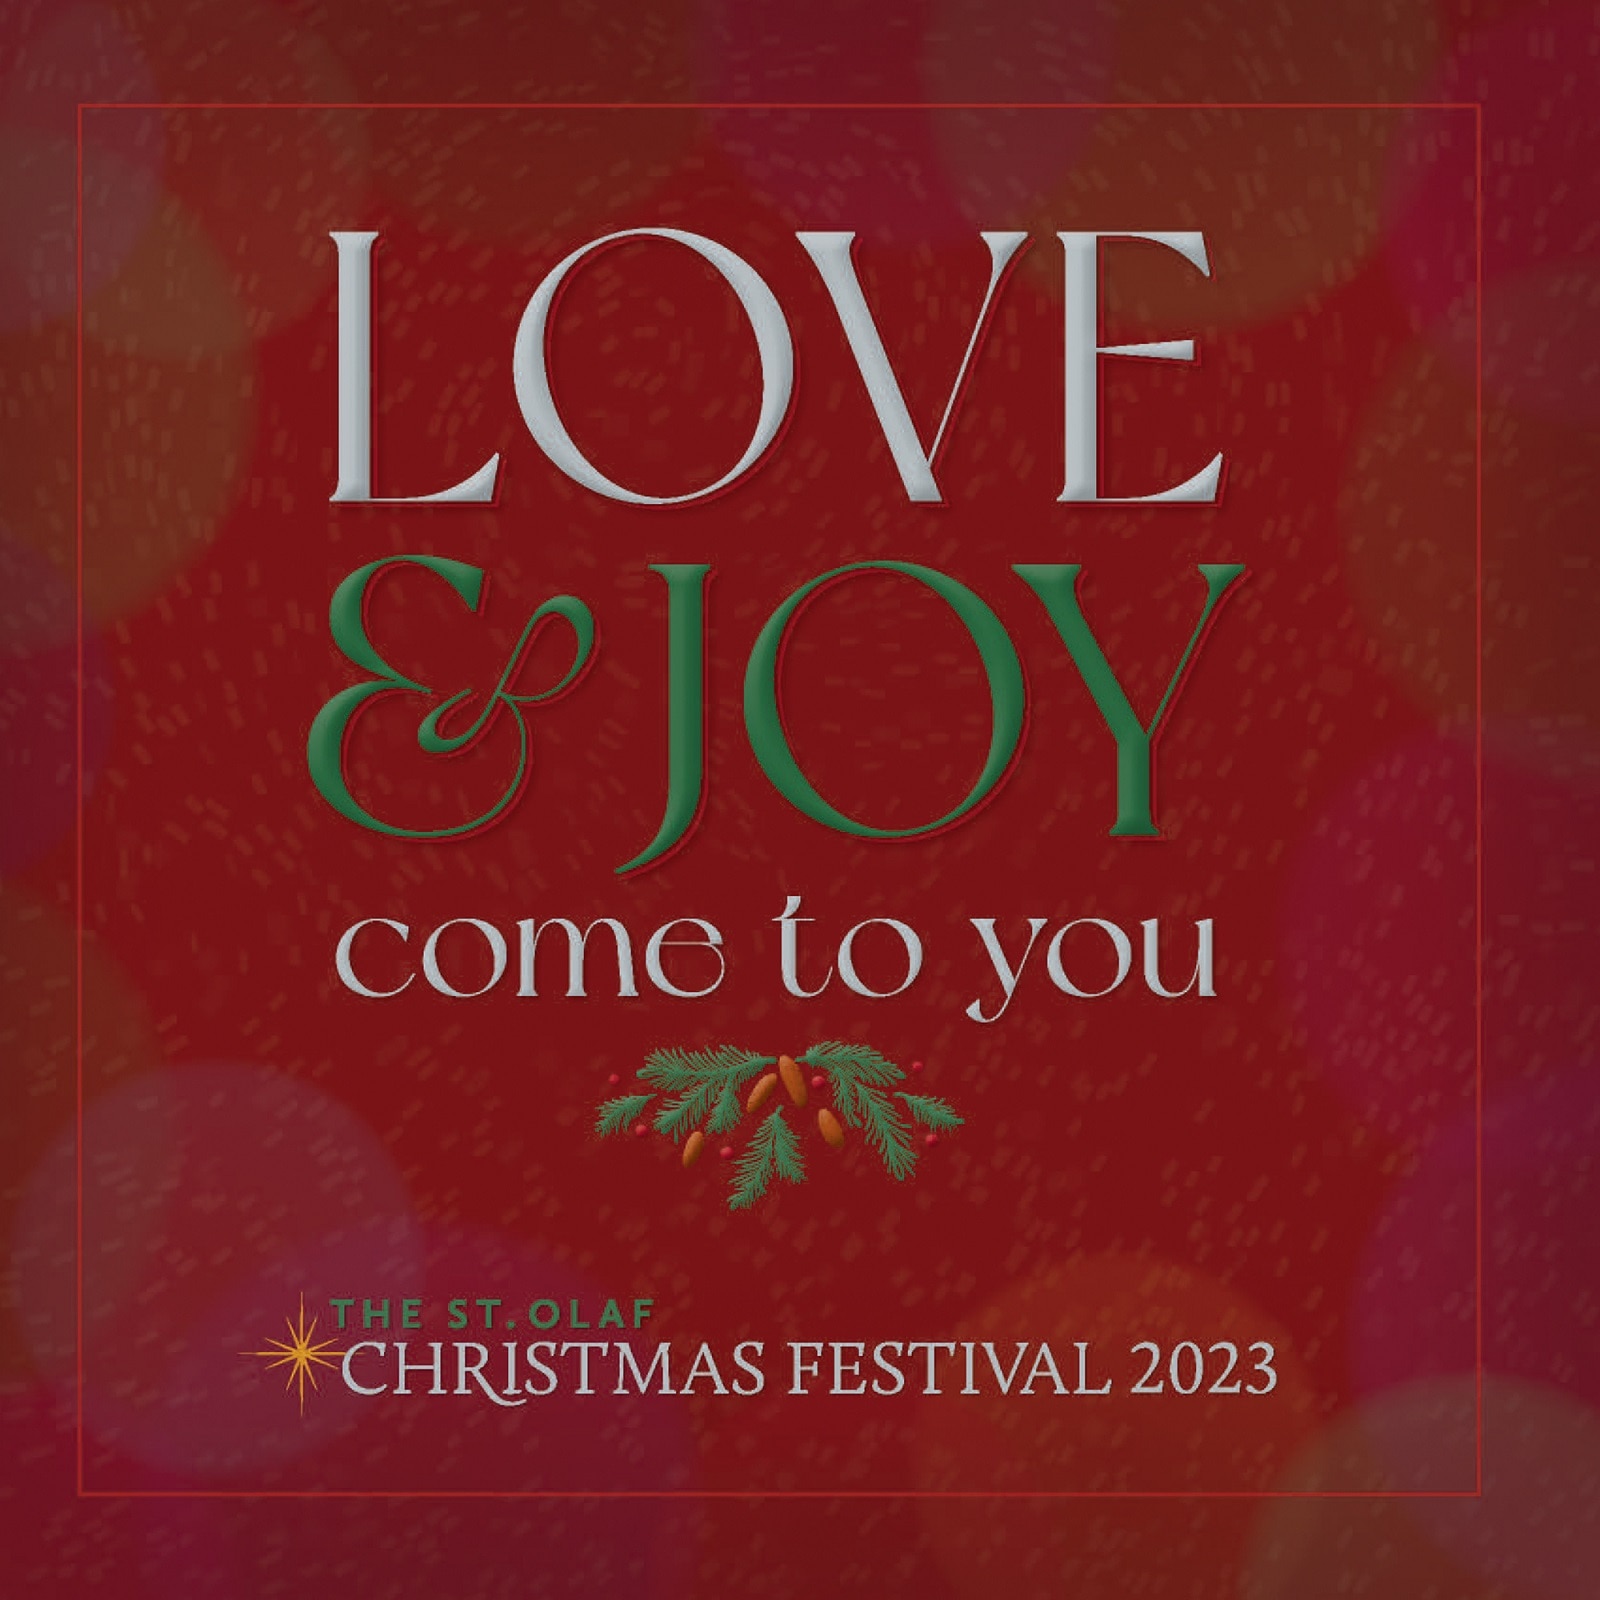 Love and Joy Come to You 2023 St. Olaf Christmas Festival